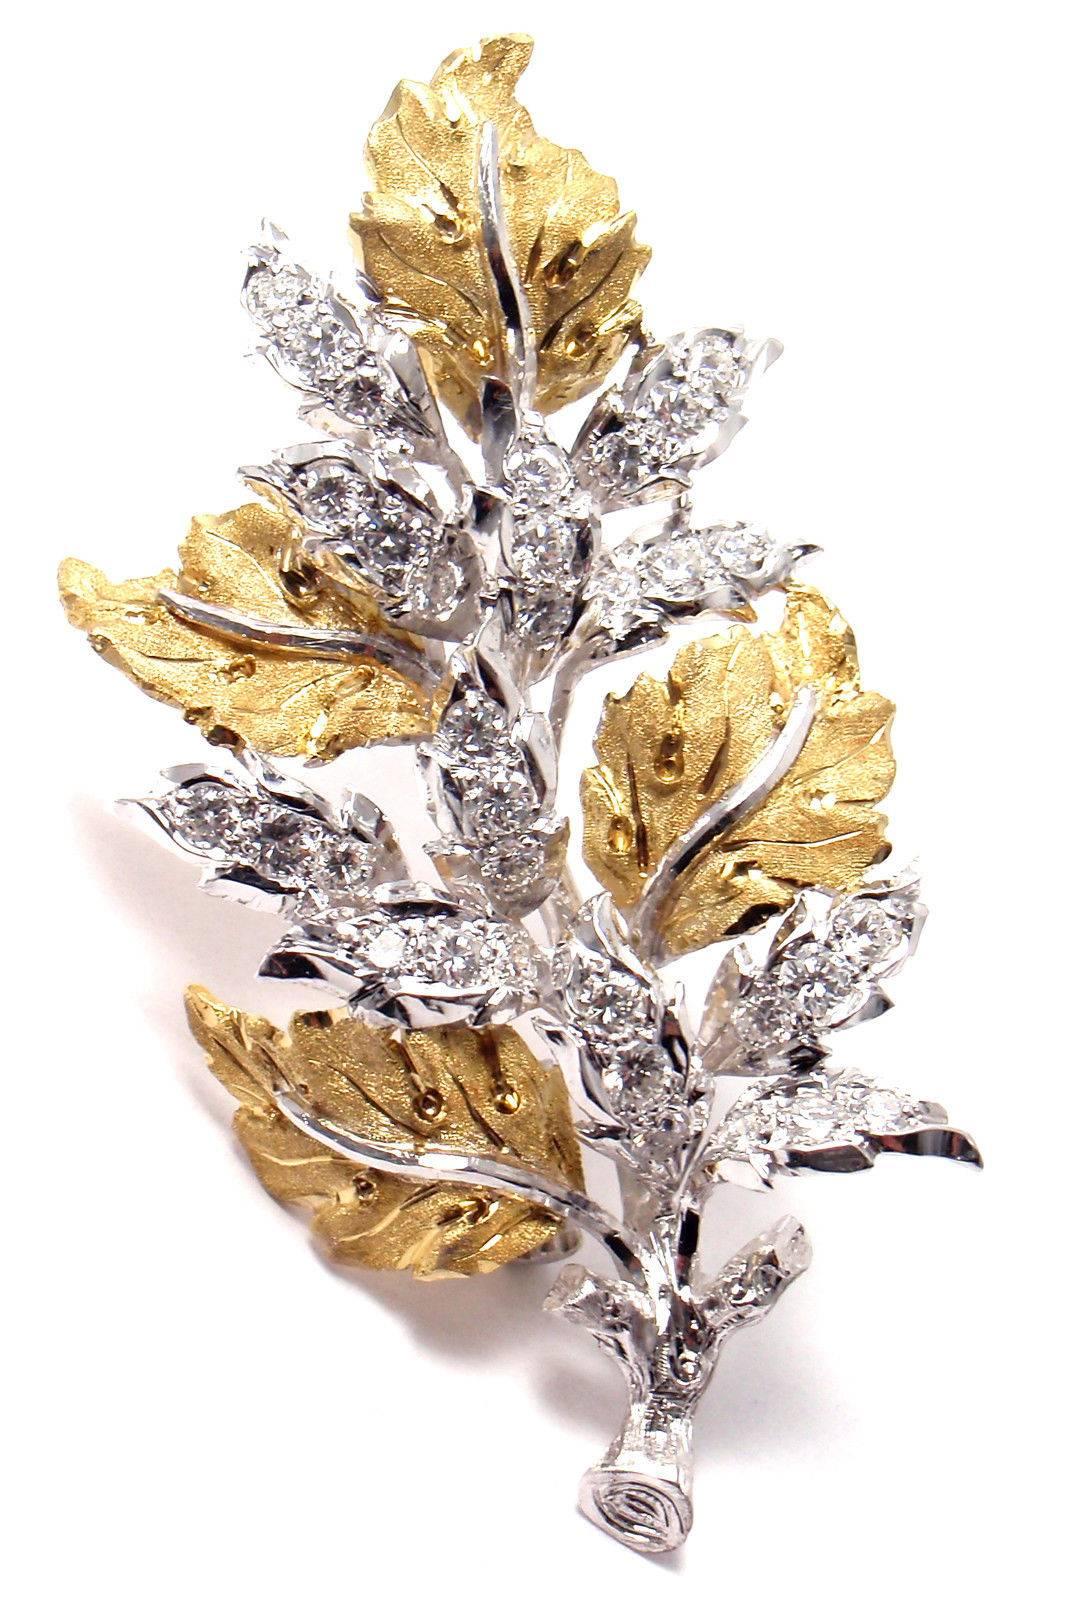 18k Yellow And White Gold Diamond Leaf Brooch Pin by Buccellati. 
With 33 round brilliant cut diamonds VS1 clarity, G color total weight approx. 1ct

Details: 
Weight: 12 grams
Measurements: 50.5mm x 26mm
Stamped Hallmarks:  Buccellati